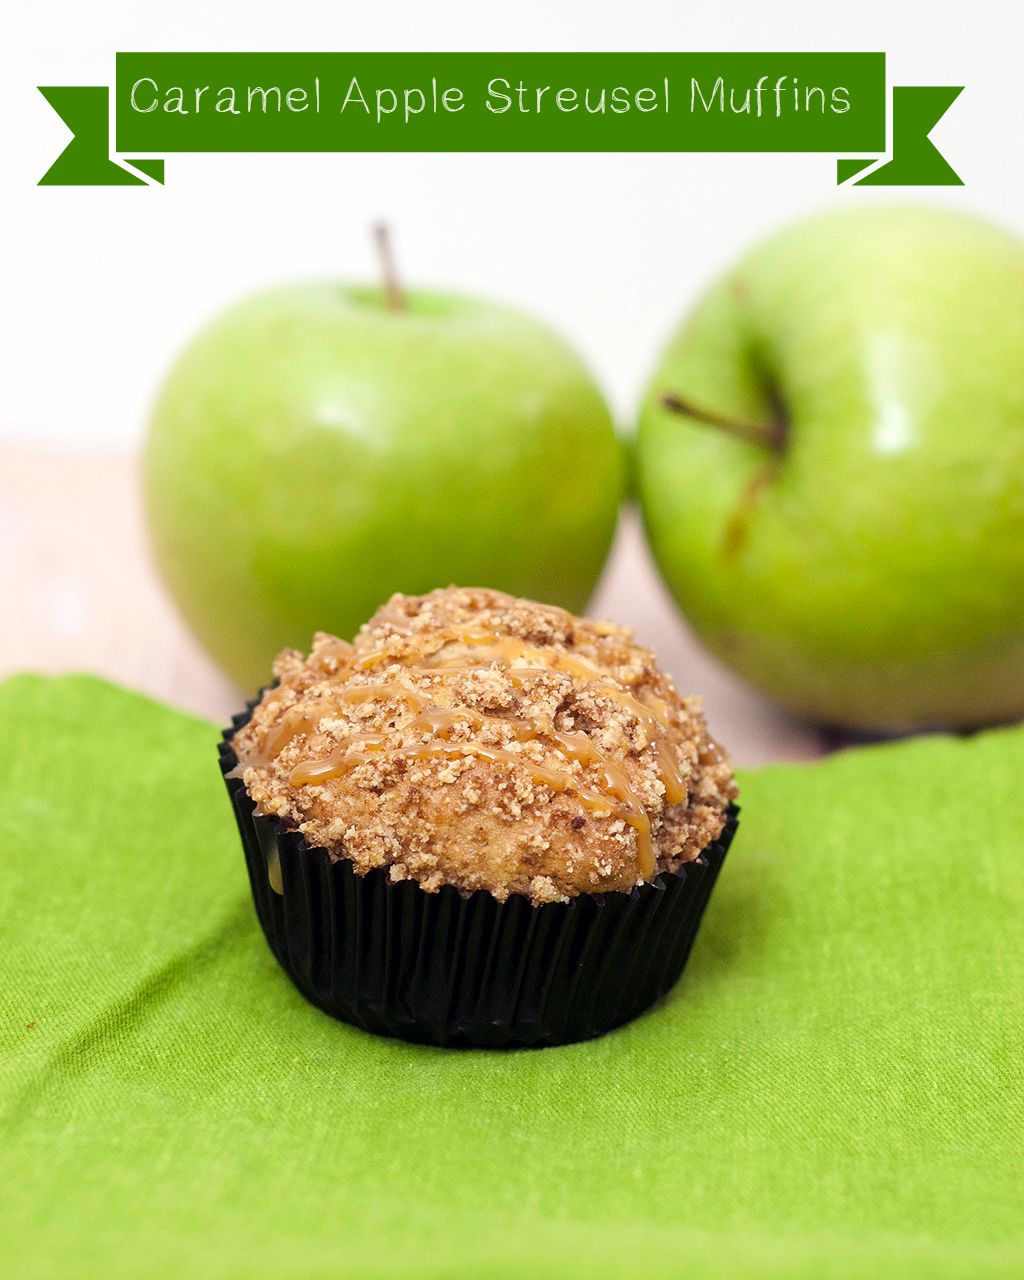 Autumn means apples are in season. Enjoy them in these easy-to-make quintessential fall breakfast muffins: caramel apple streusel muffins. #SundaySupper TheRedheadBaker.com